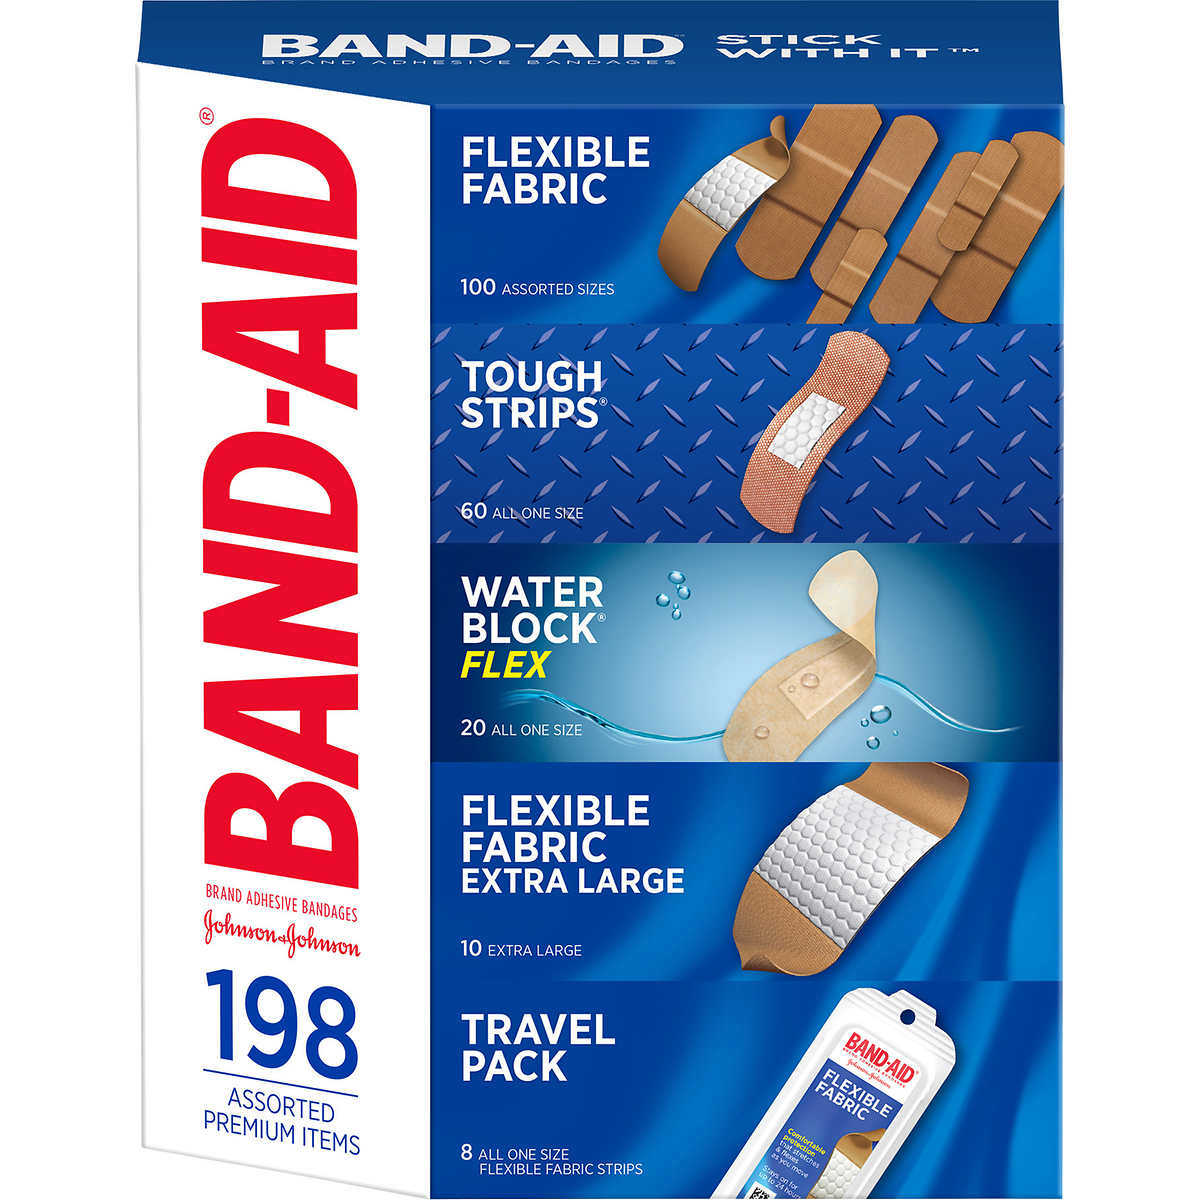 Band-Aid Brand Water Block Flex 100% Waterproof Adhesive Bandages for  Knuckles & Fingertips, FirstAid Wound Care of Minor Cuts, Scrapes & Wounds